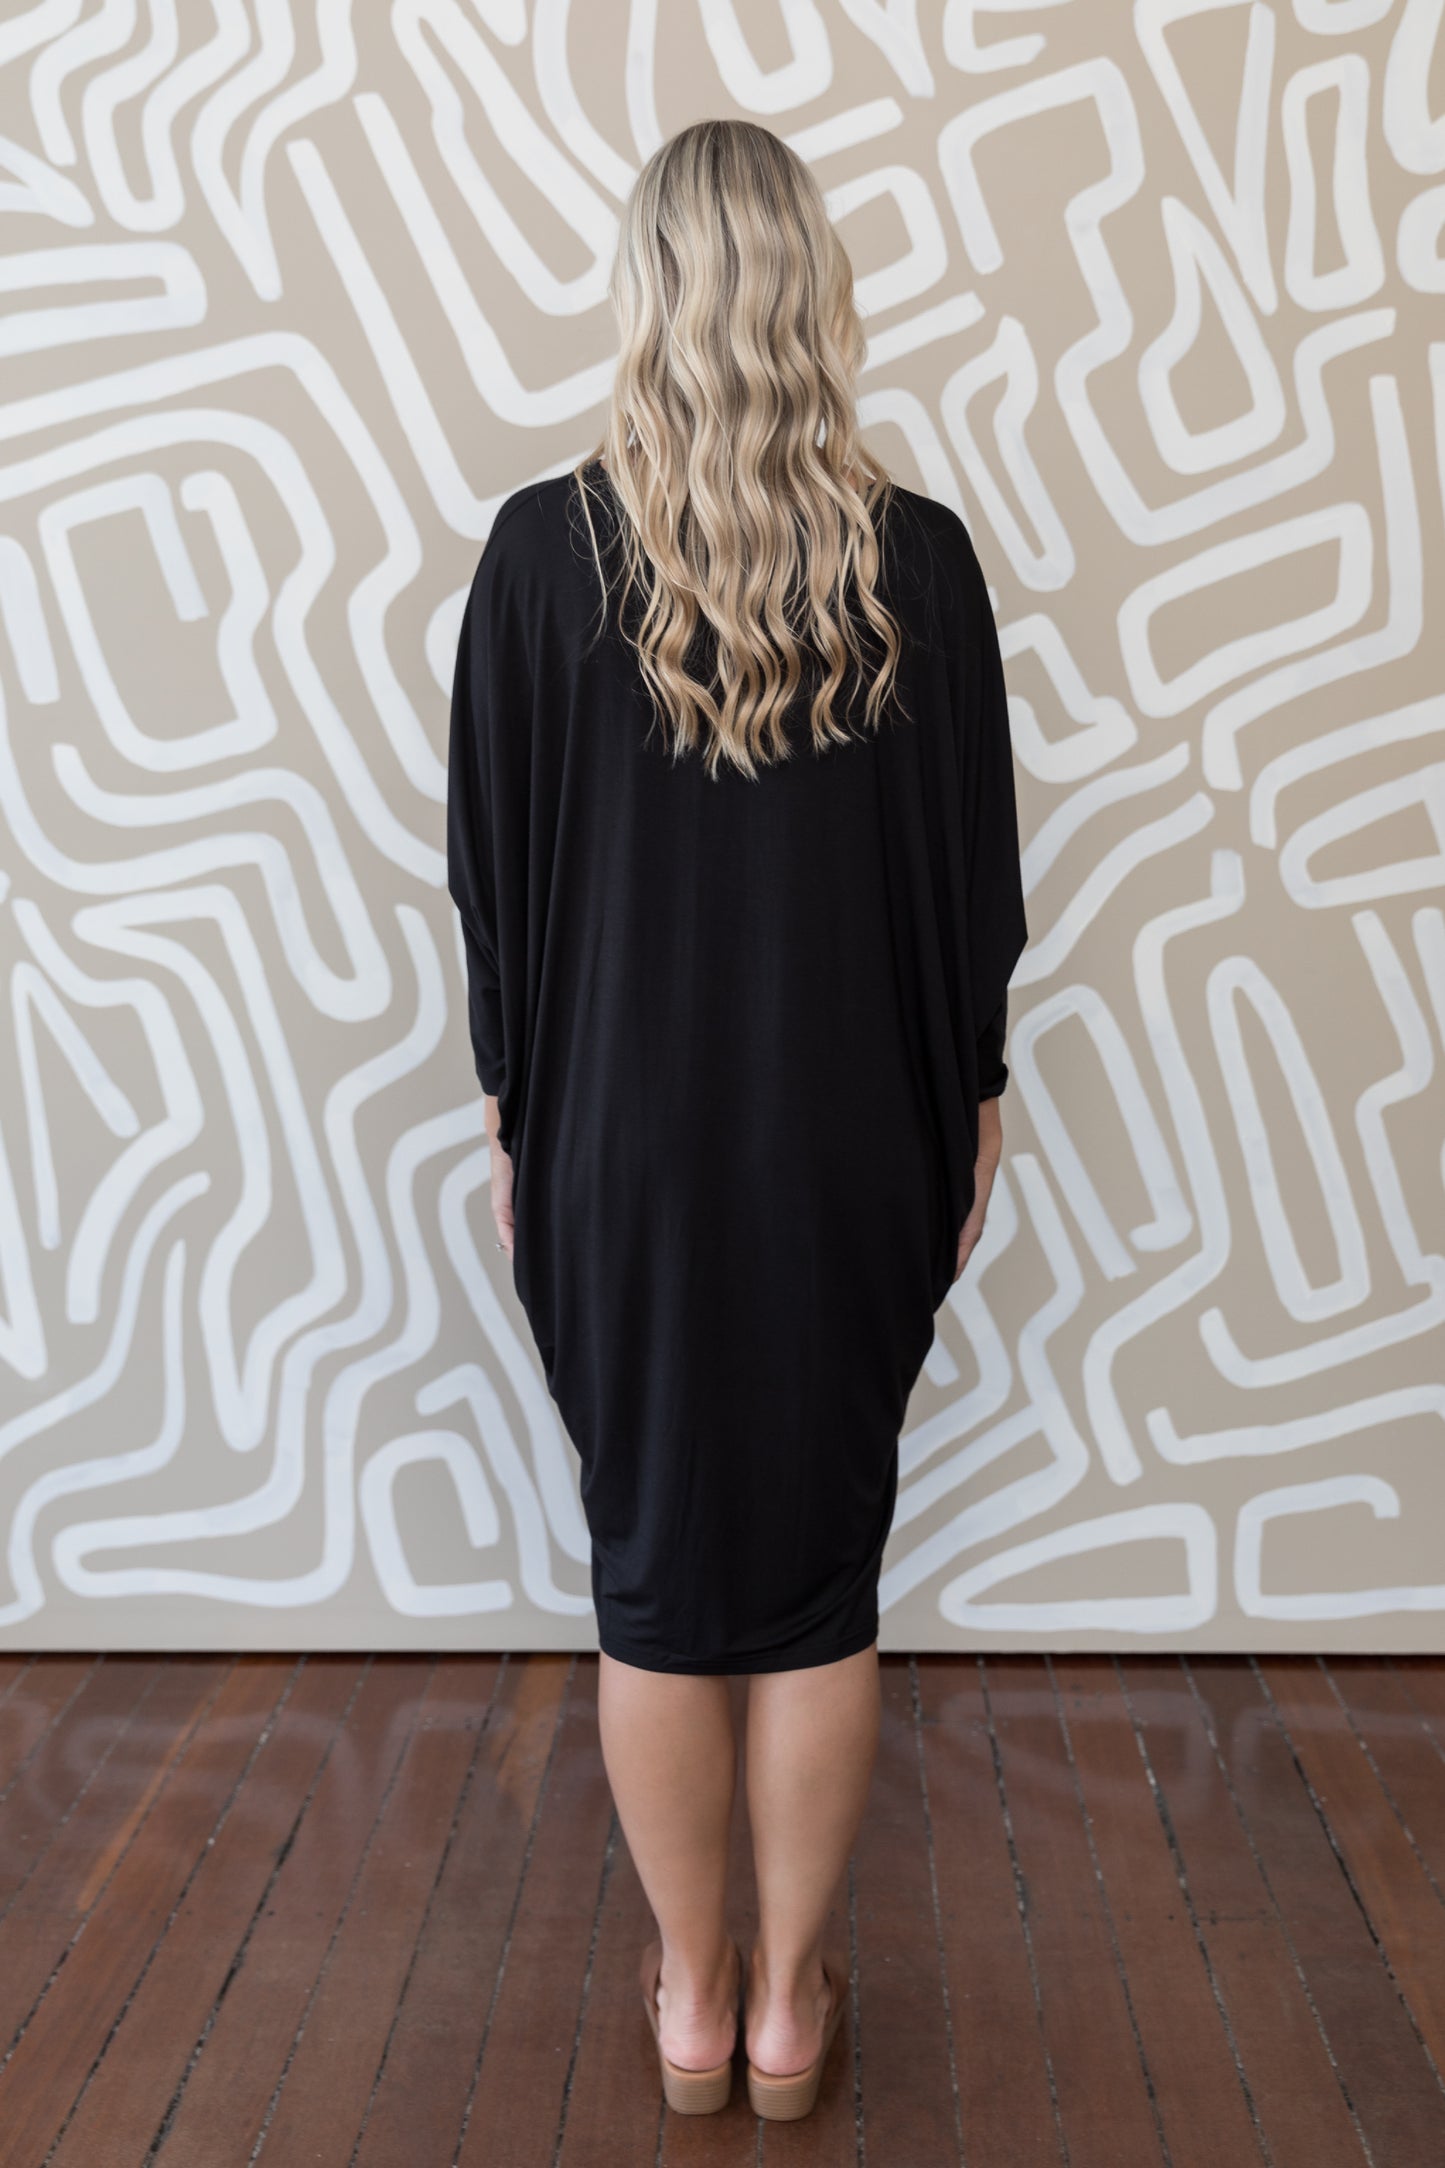 Plus-Sized Black Dresses | PQ Collection | Long Sleeve Miracle Dress